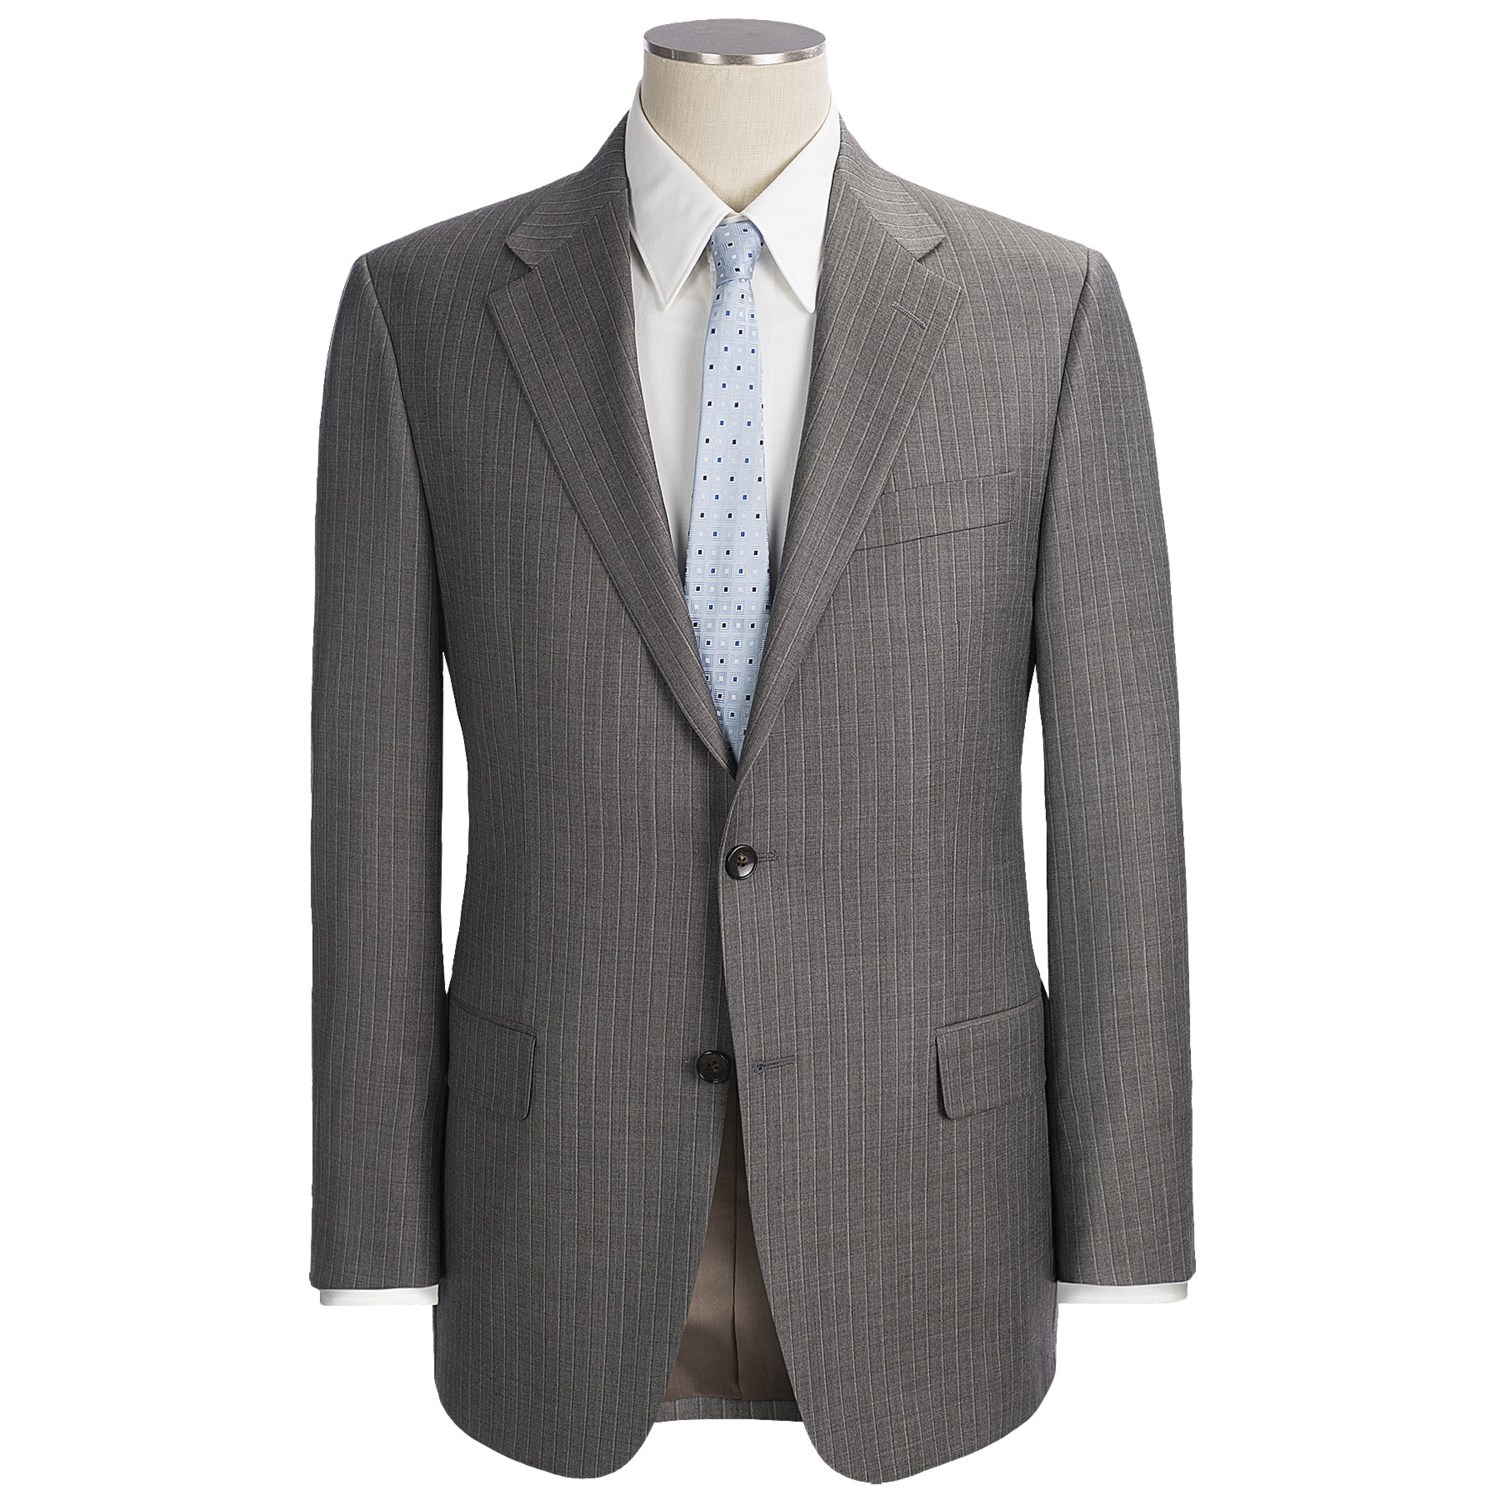 Hickey Freeman Stripe Suit - Worsted Wool (For Men)